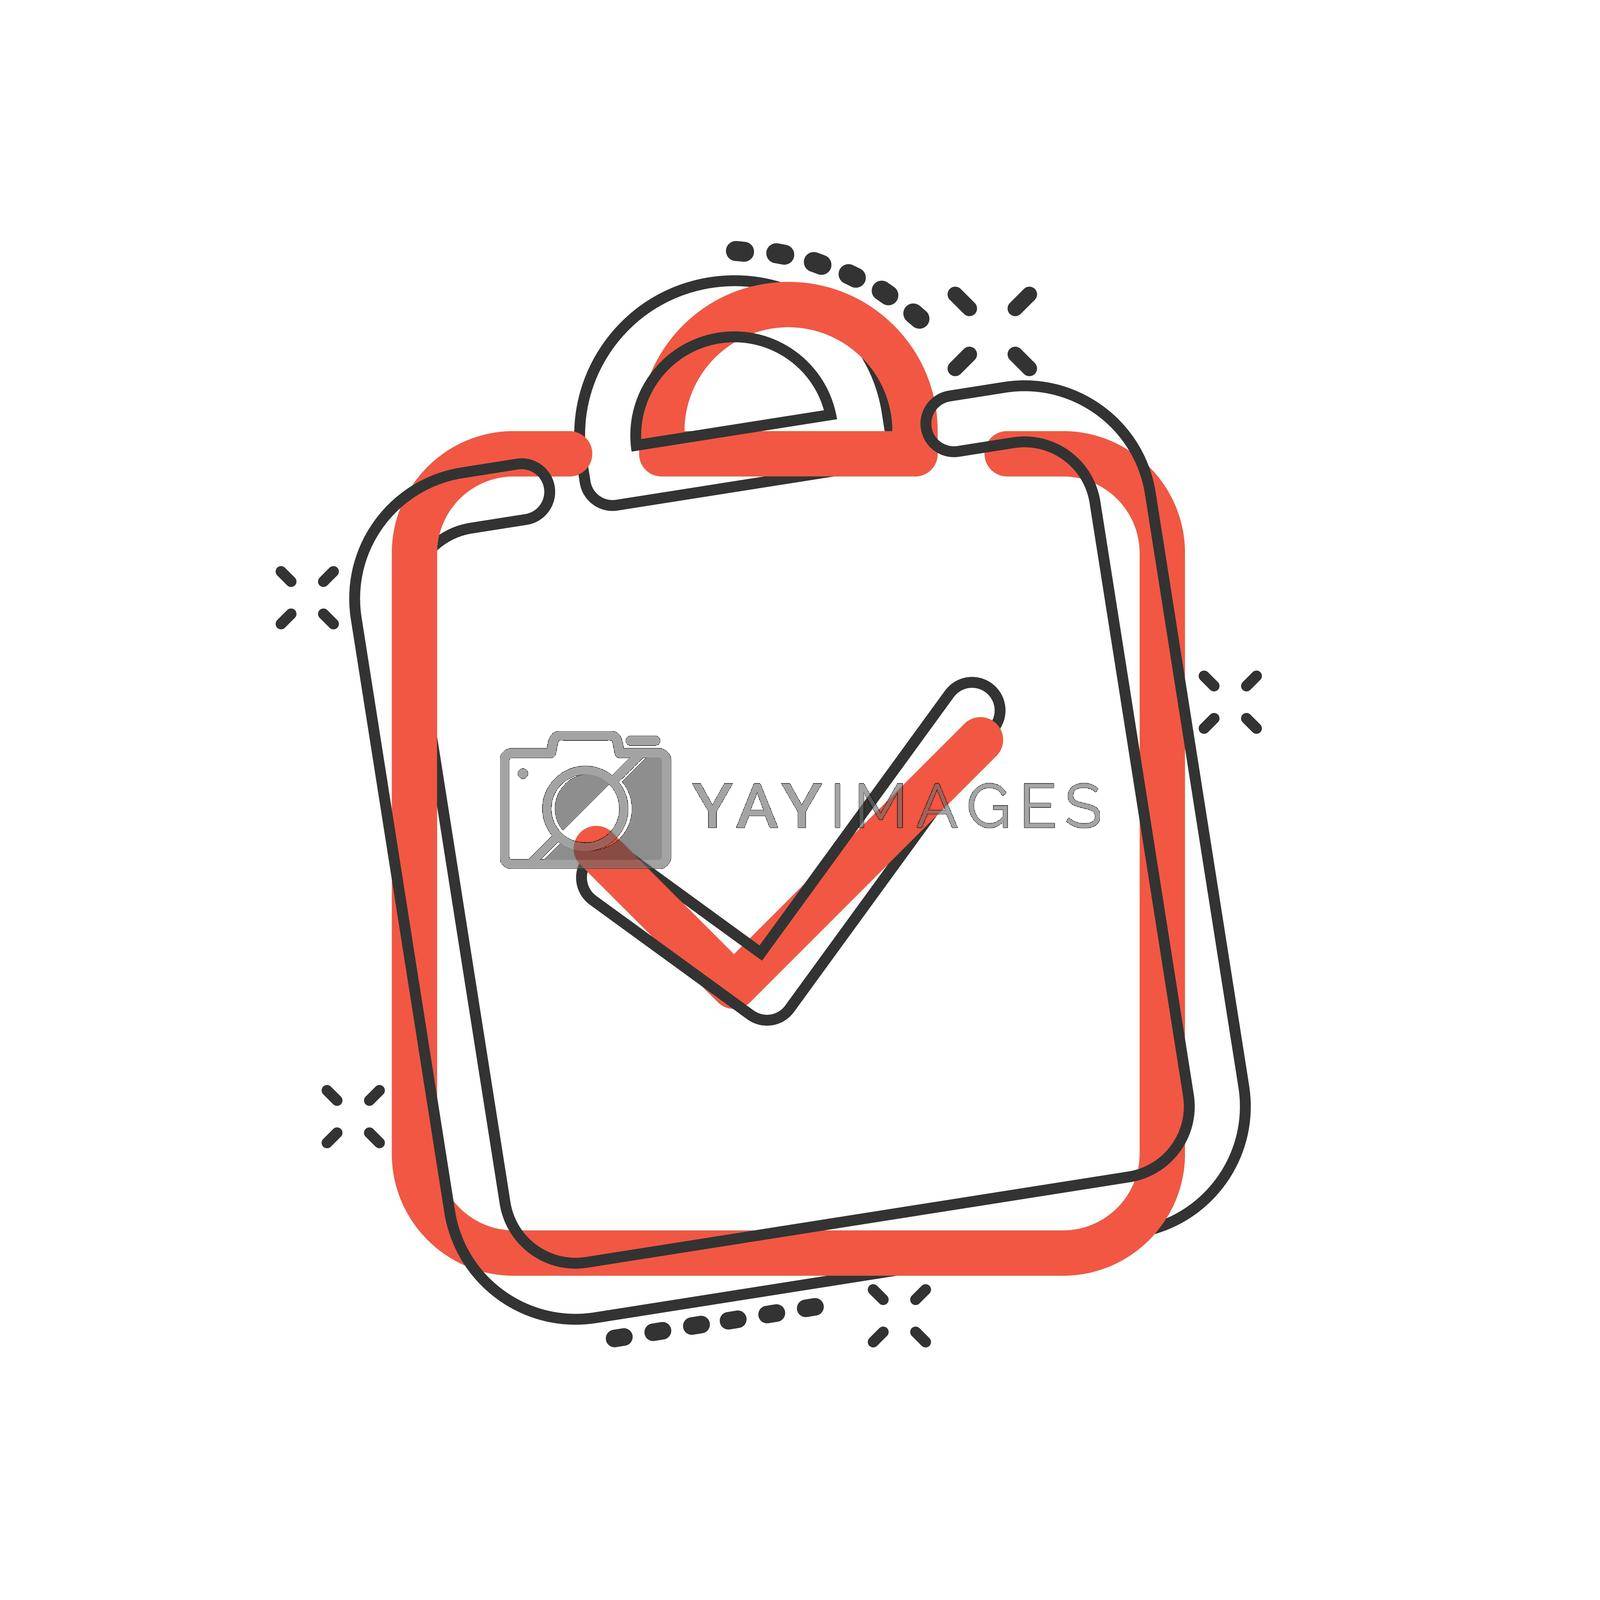 Royalty free image of Document checkbox icon in comic style. Test cartoon vector illustration on white isolated background. Contract splash effect business concept. by LysenkoA